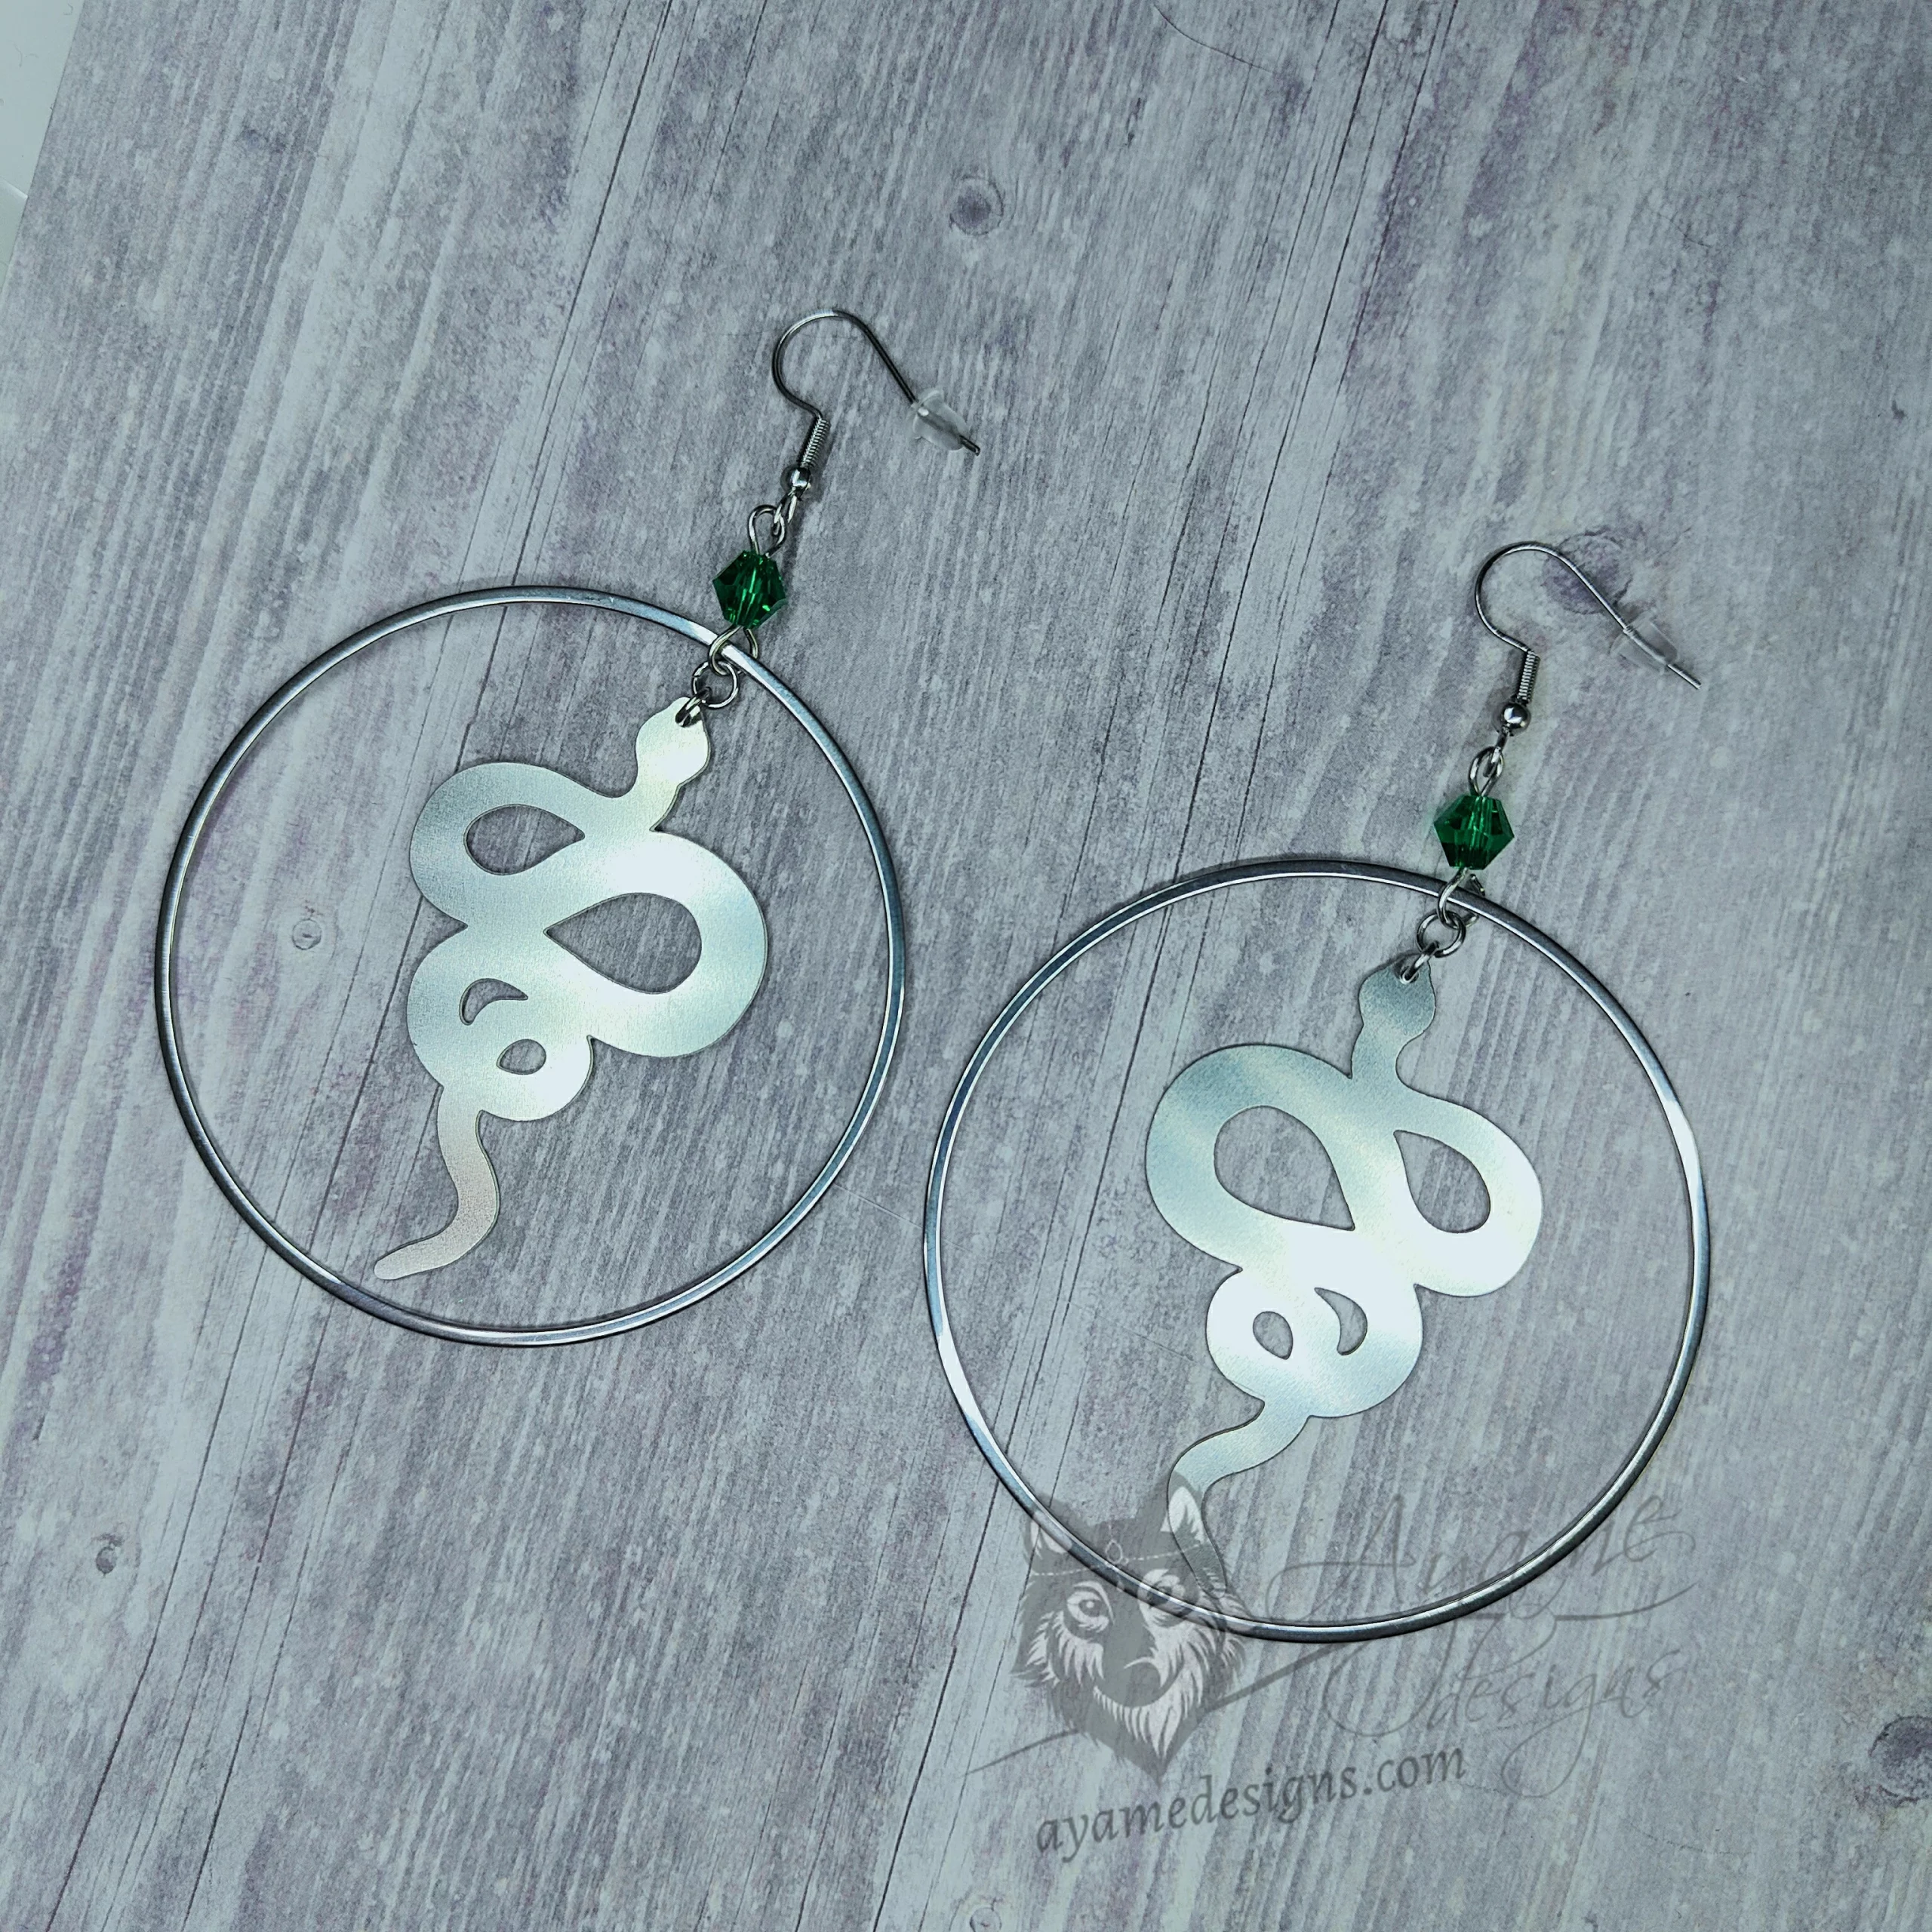 Handmade earrings with laser cut stainless steel snake charms inside large stainless steel rings with green Austrian crystal beads, on stainless steel earring hooks